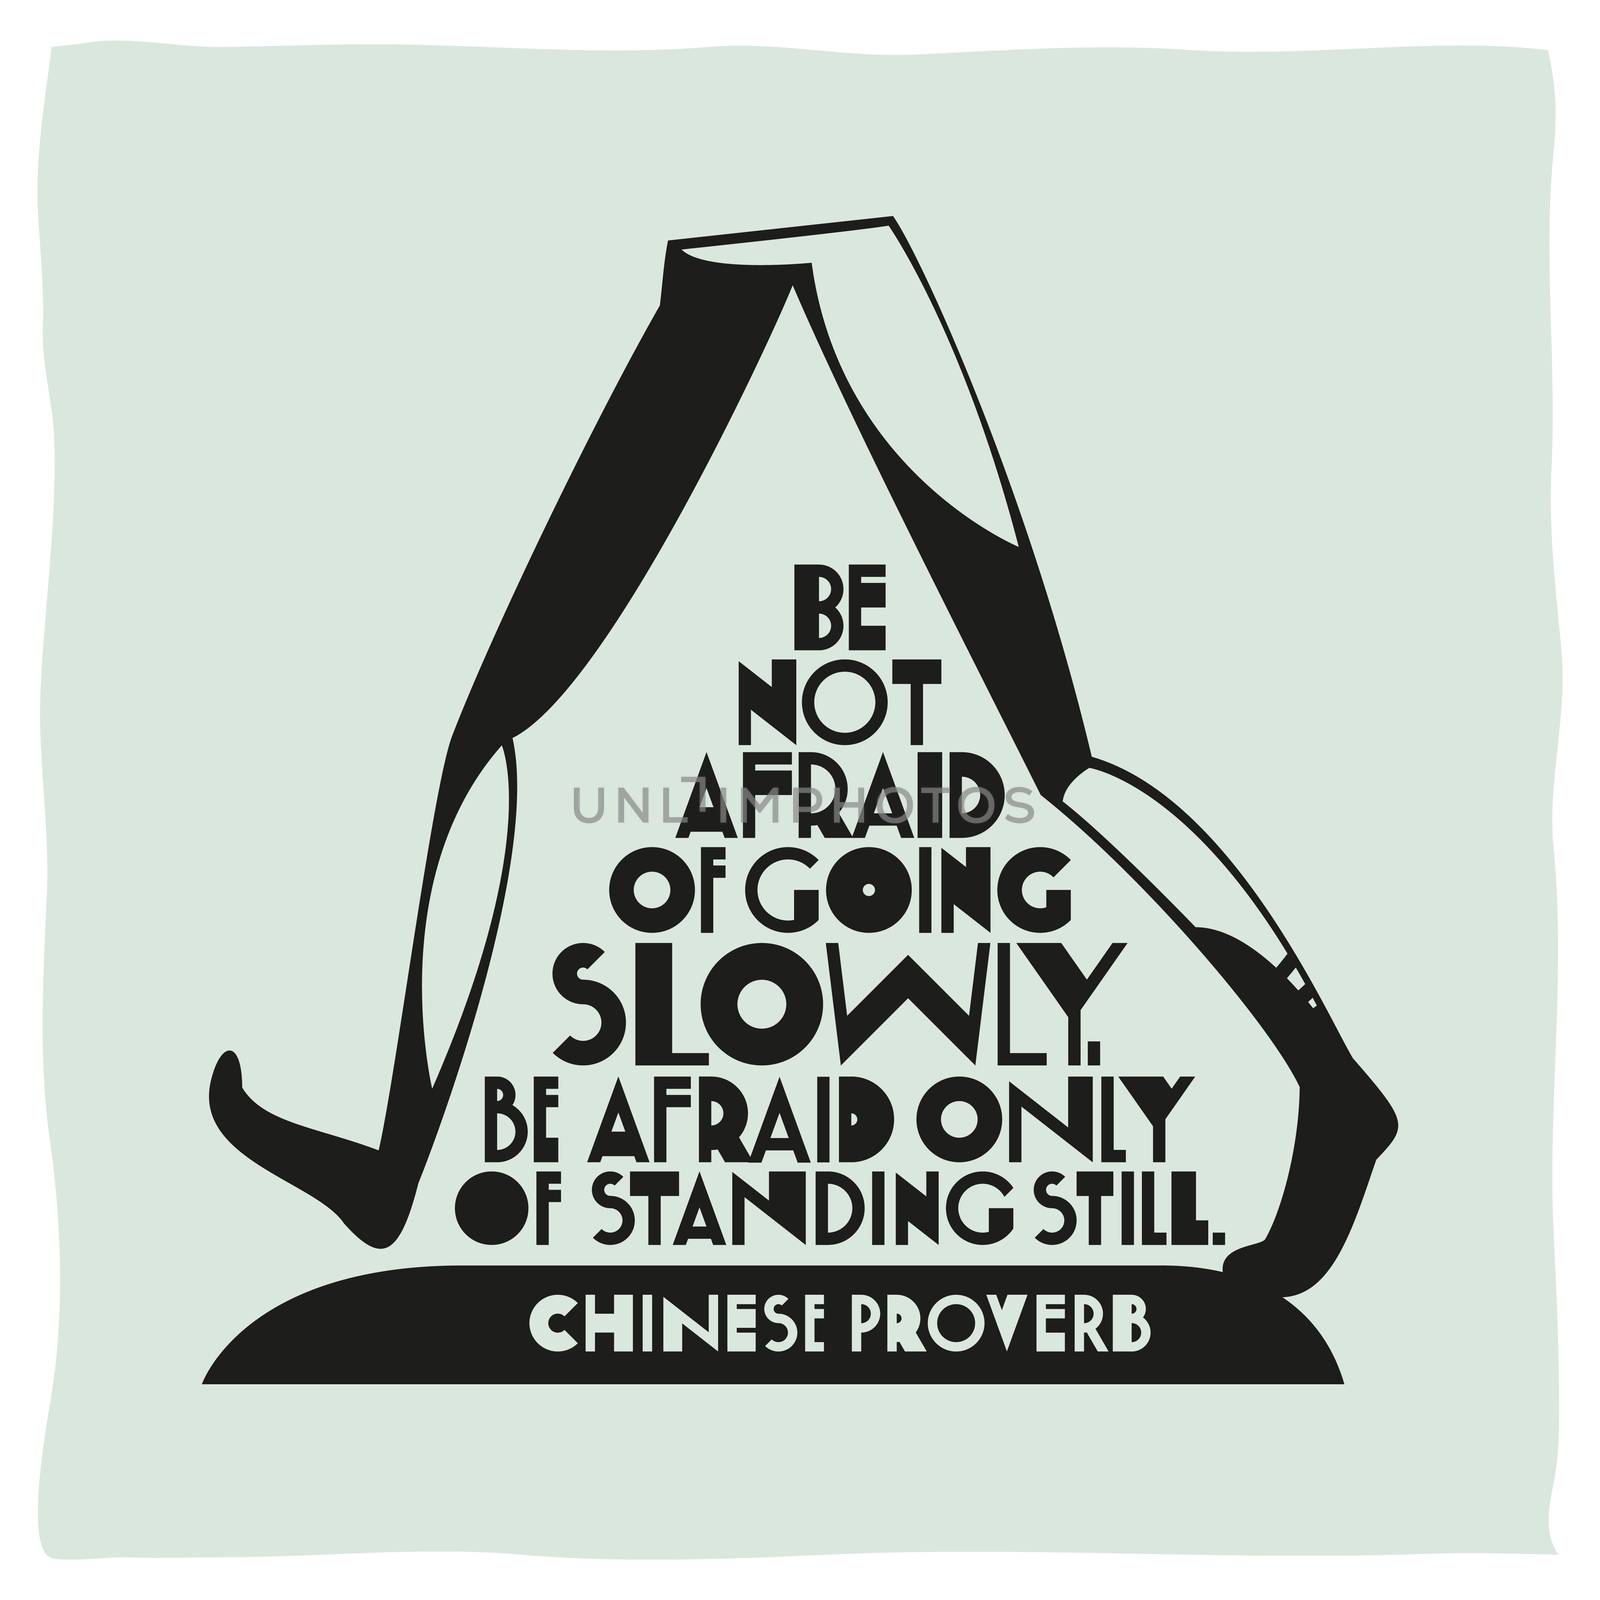 Calligraphy of Chinese proverb. Be not afraid of going slowly, be afraid only of standing still